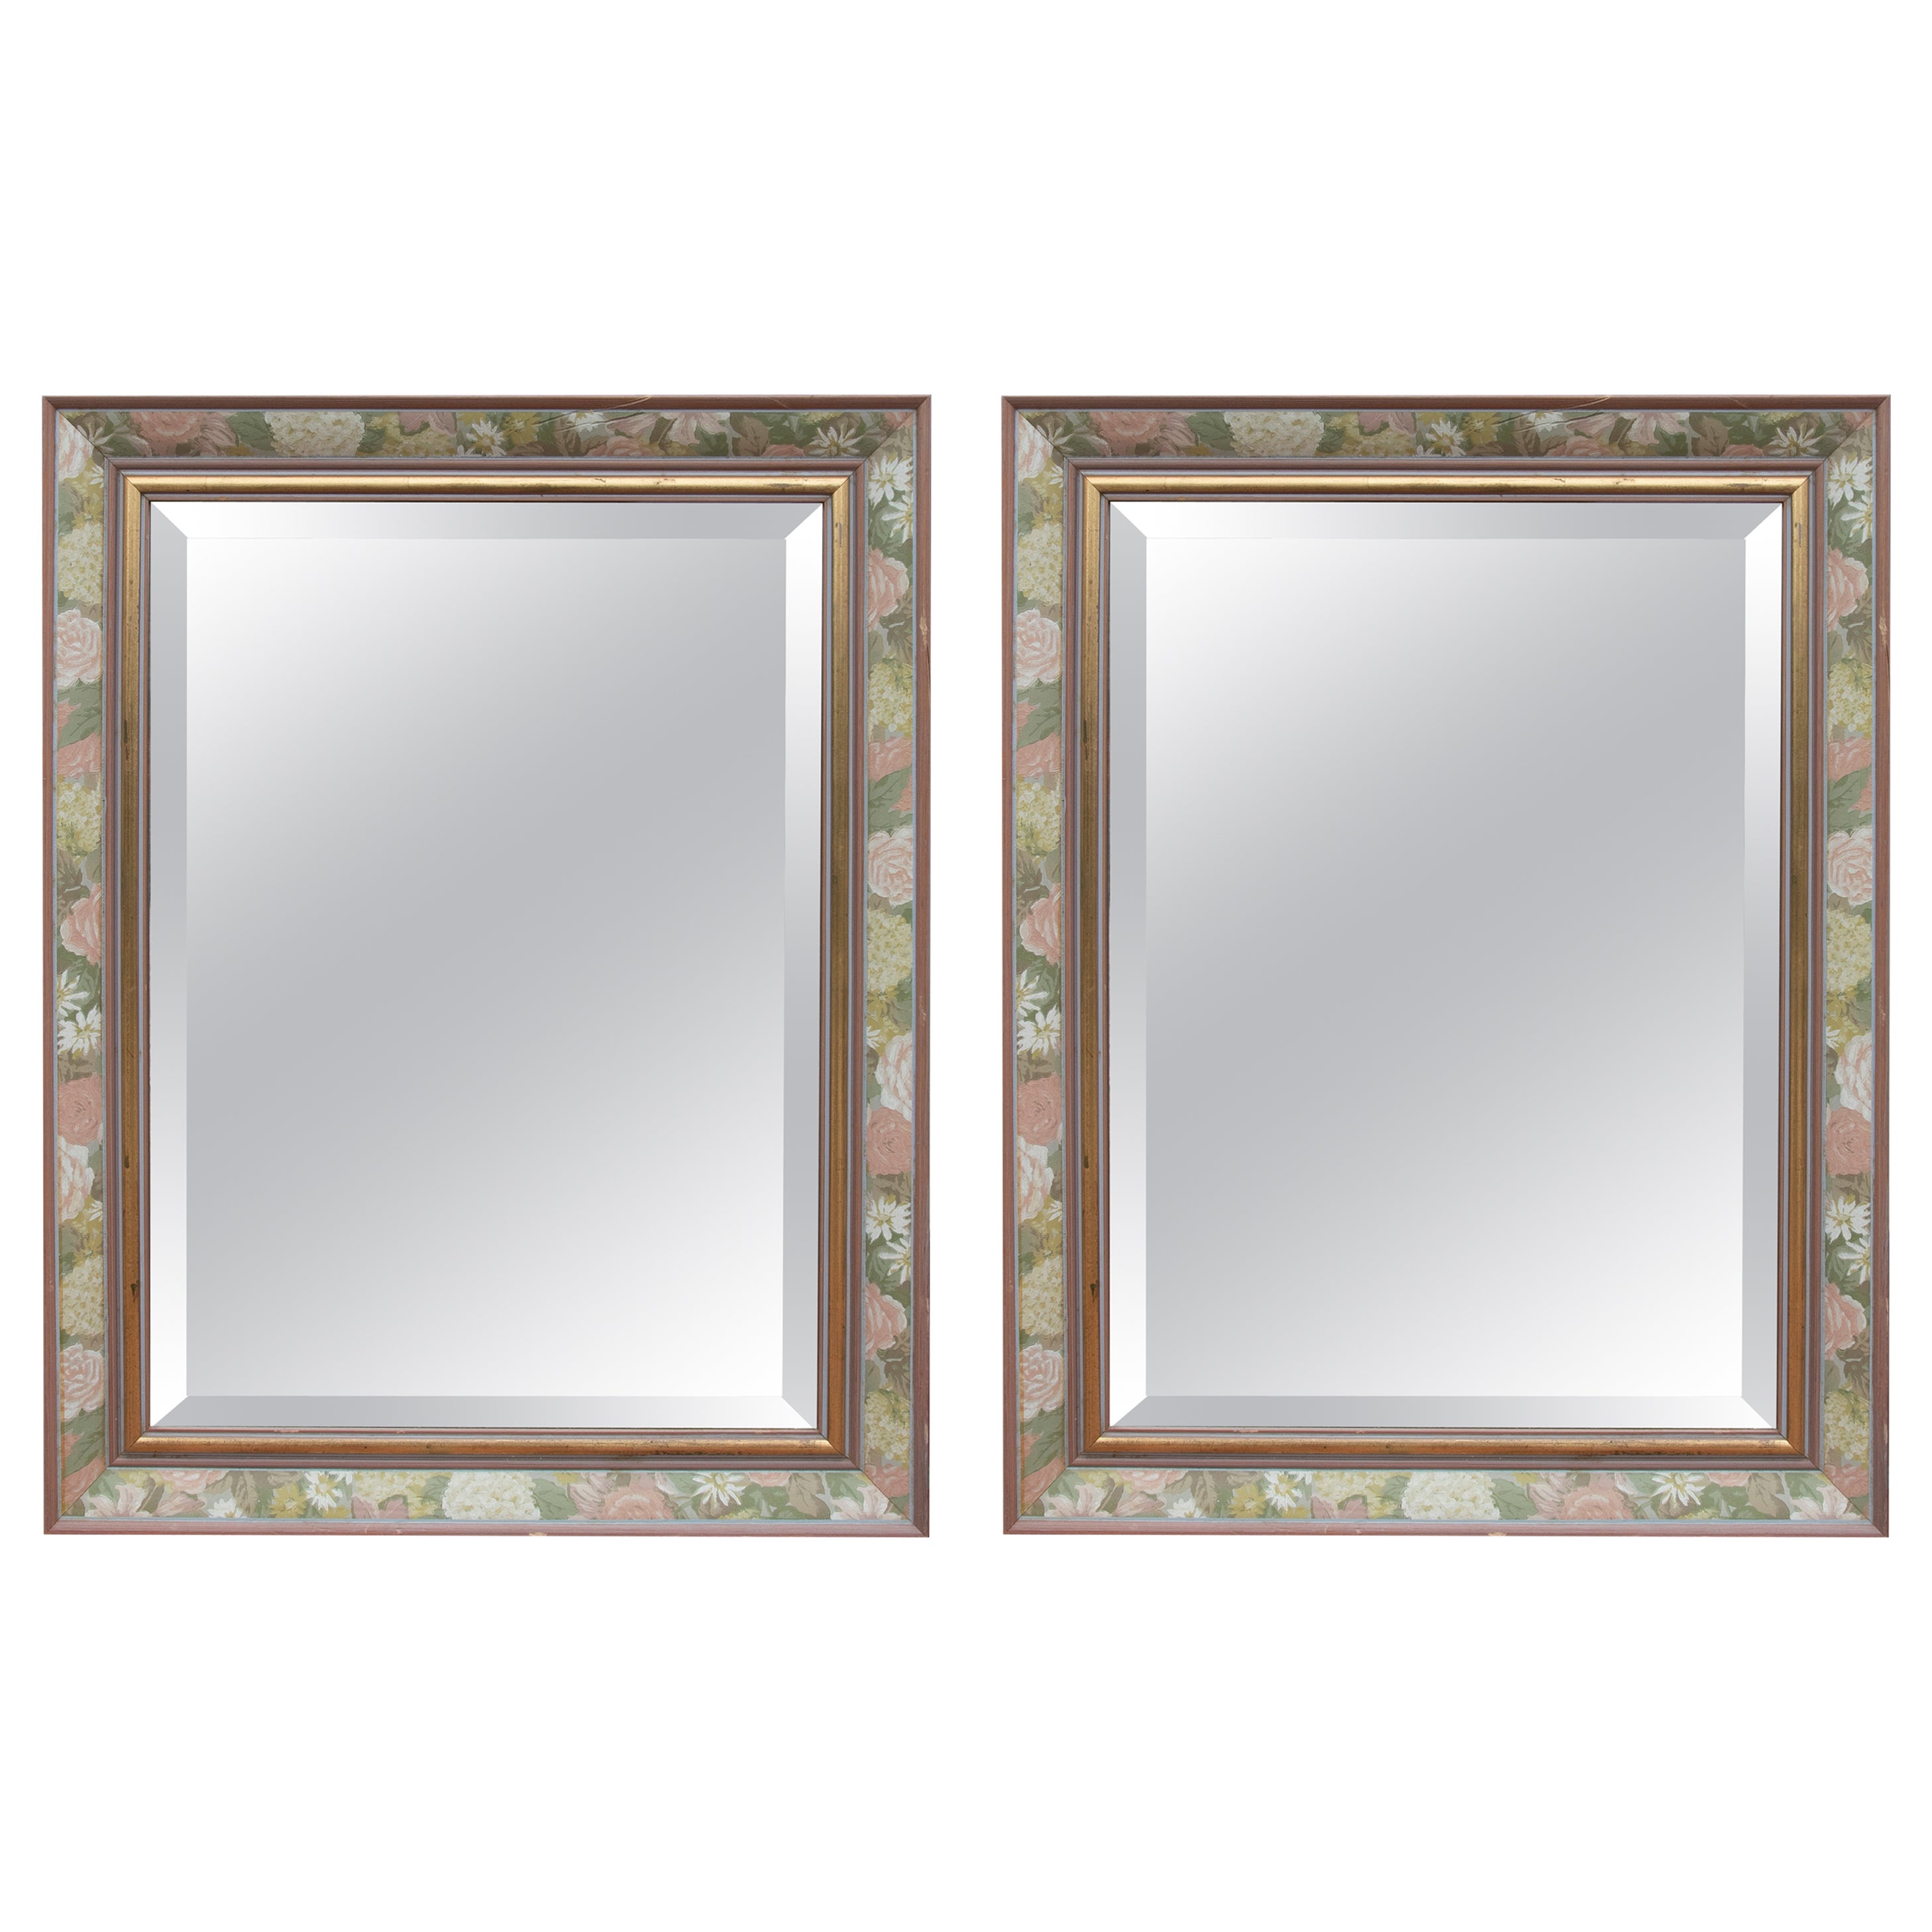 Pair of Polychrome Wooden Mirrors with Flower Scenes 